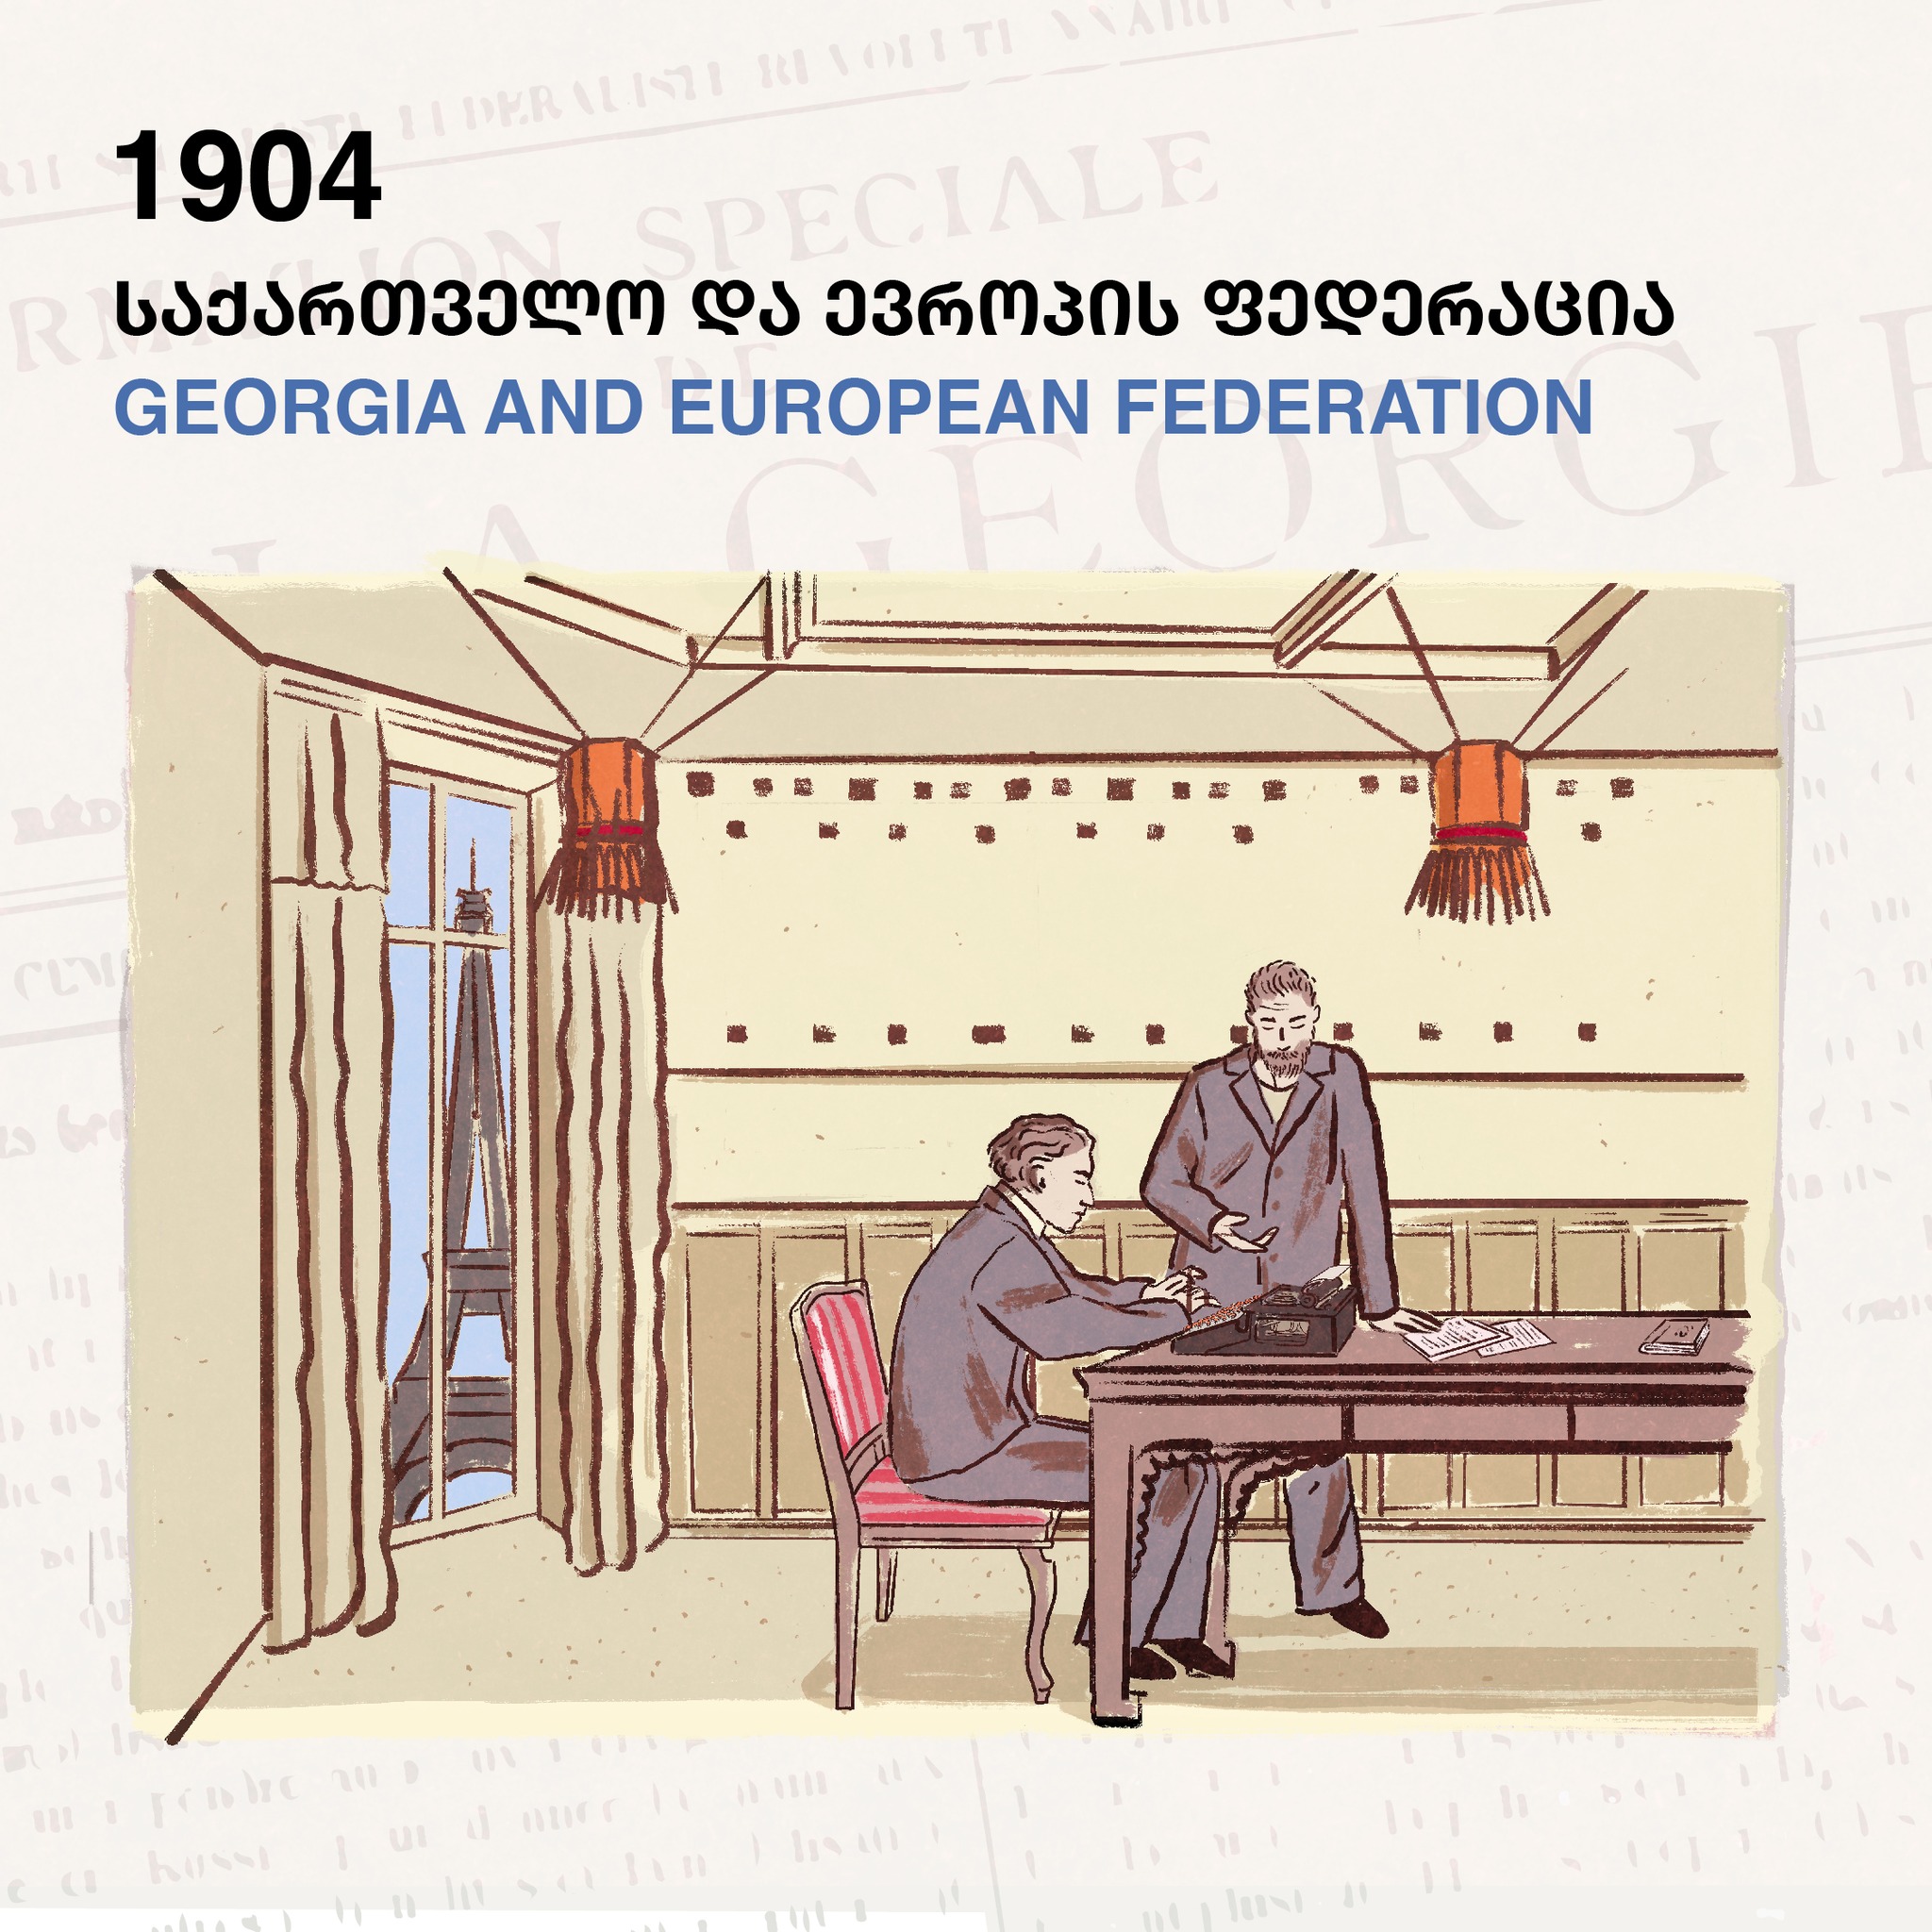 1904 – The first political party in the history of Georgia, Revolutionary Party of Socialist-Federalists of Georgia is founded in Geneva